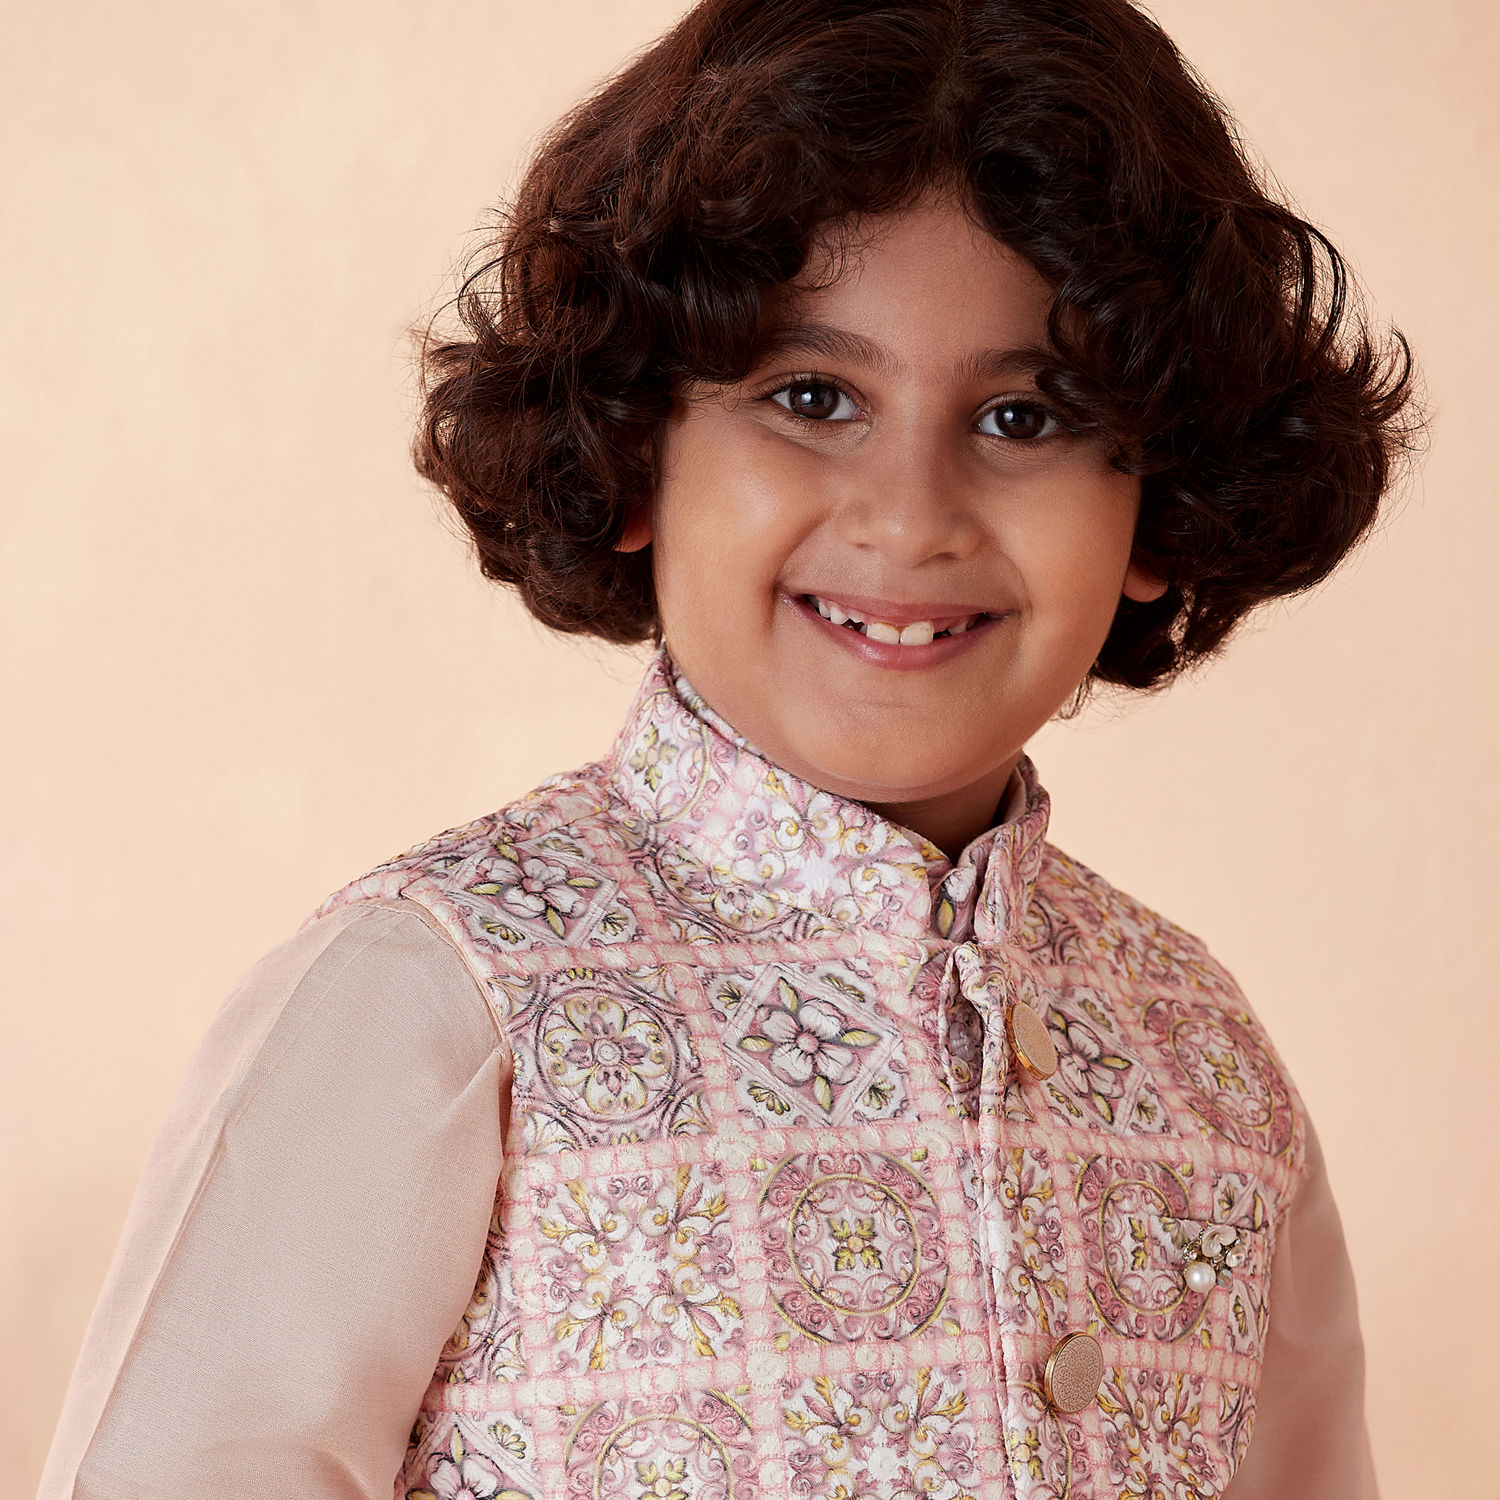 Buy Indo Western Outfit for Baby Boy – 4-5 Years Kids Ethnic Wear